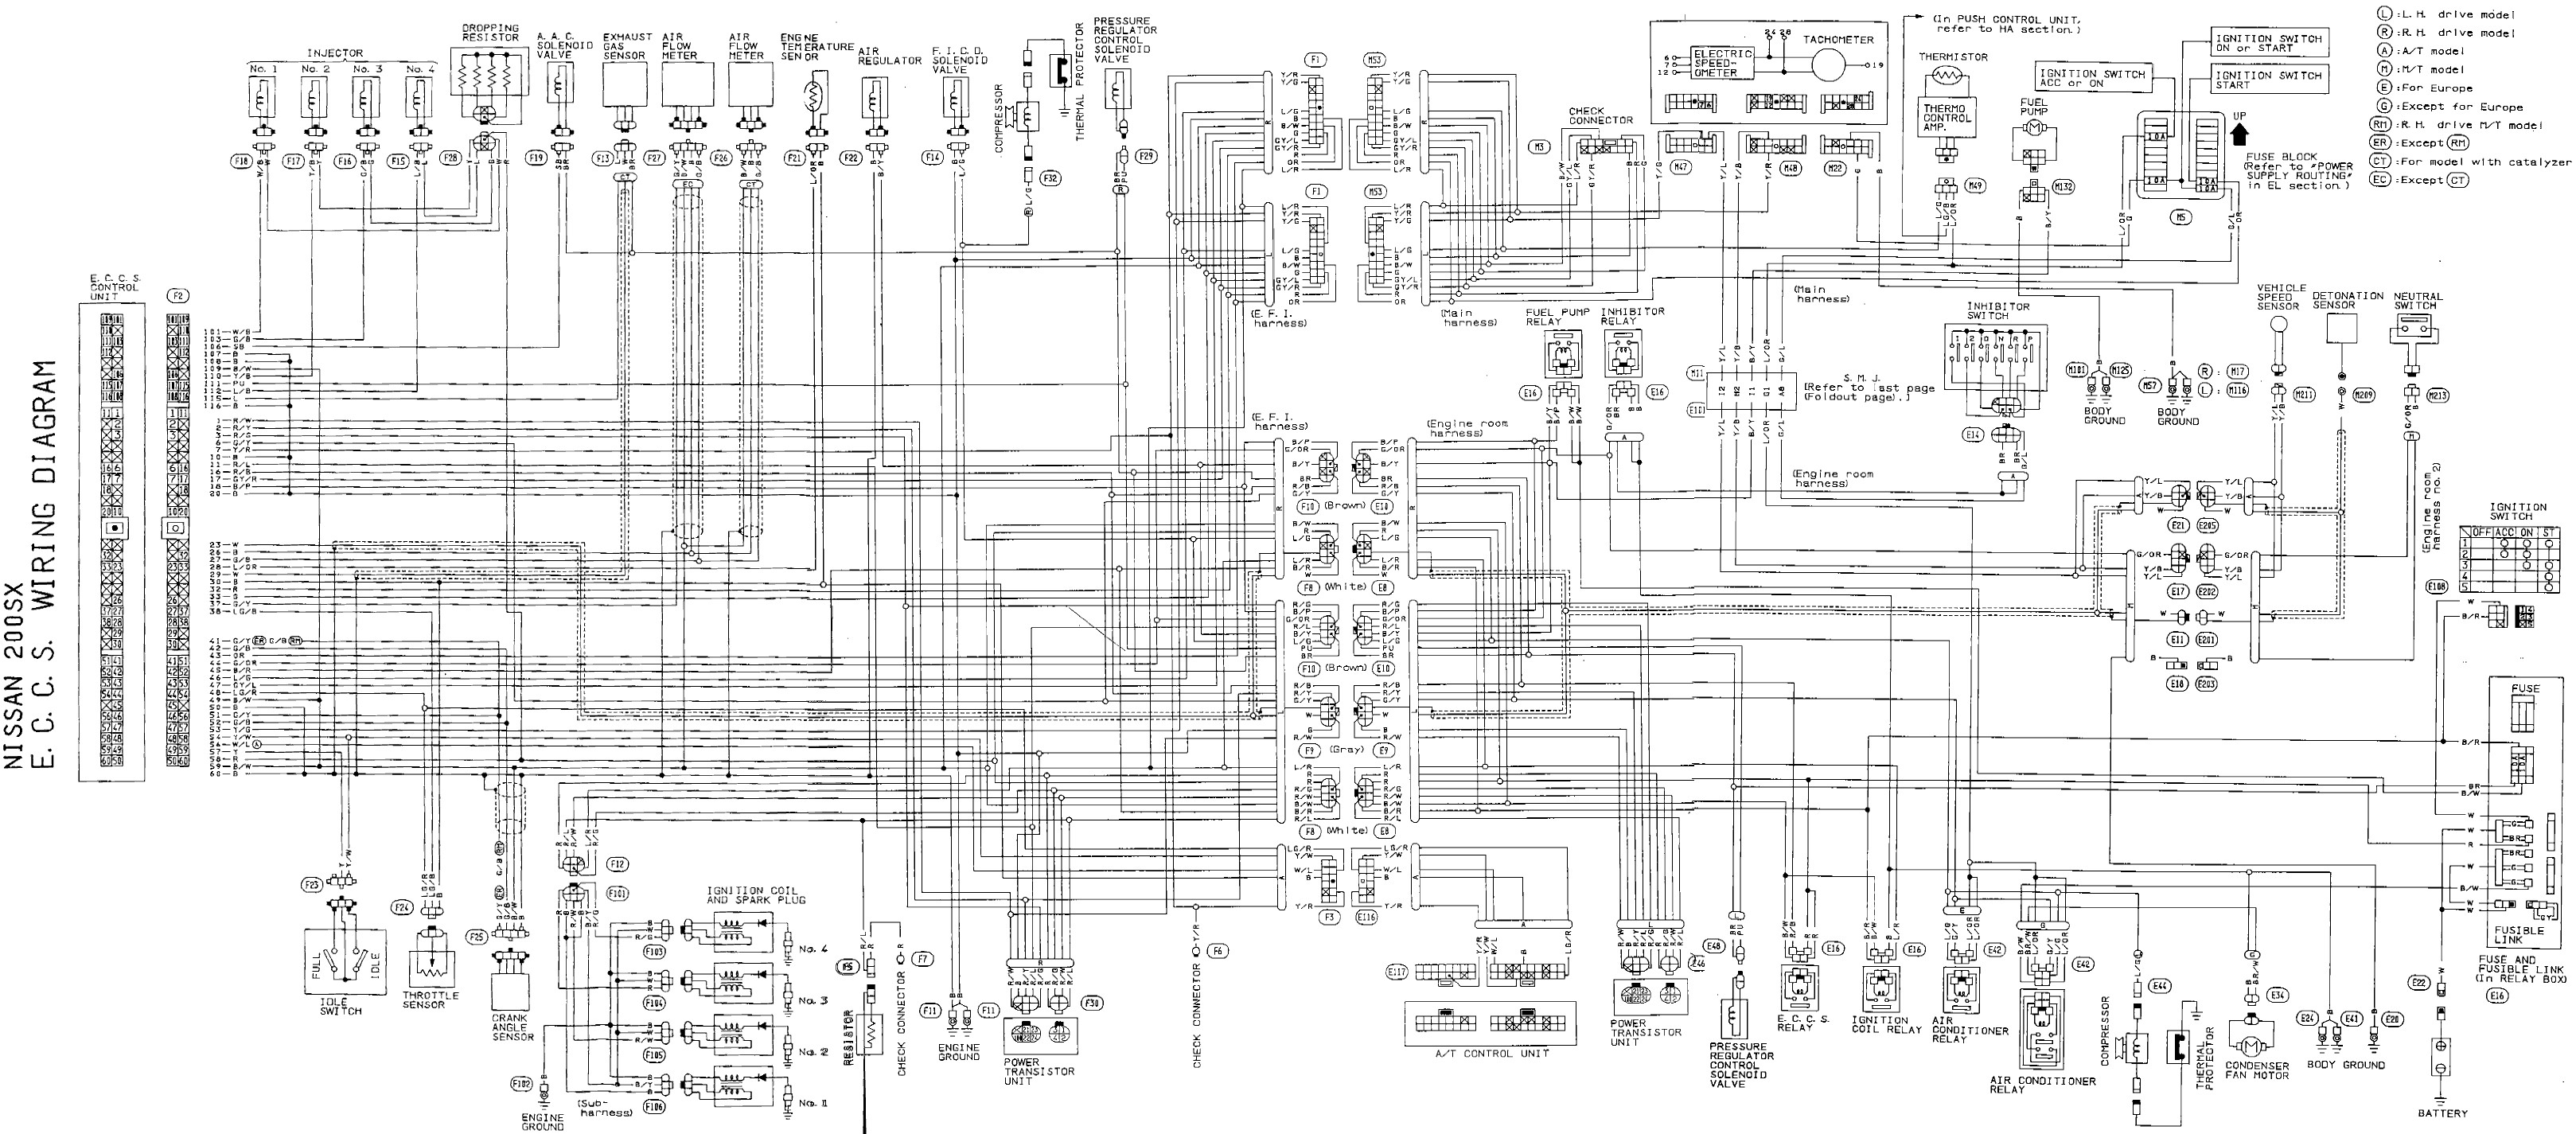 Nissan 300zx Engine Diagram 200sx Engine Wiring Harness Get Free Image About Wiring Diagram Of Nissan 300zx Engine Diagram